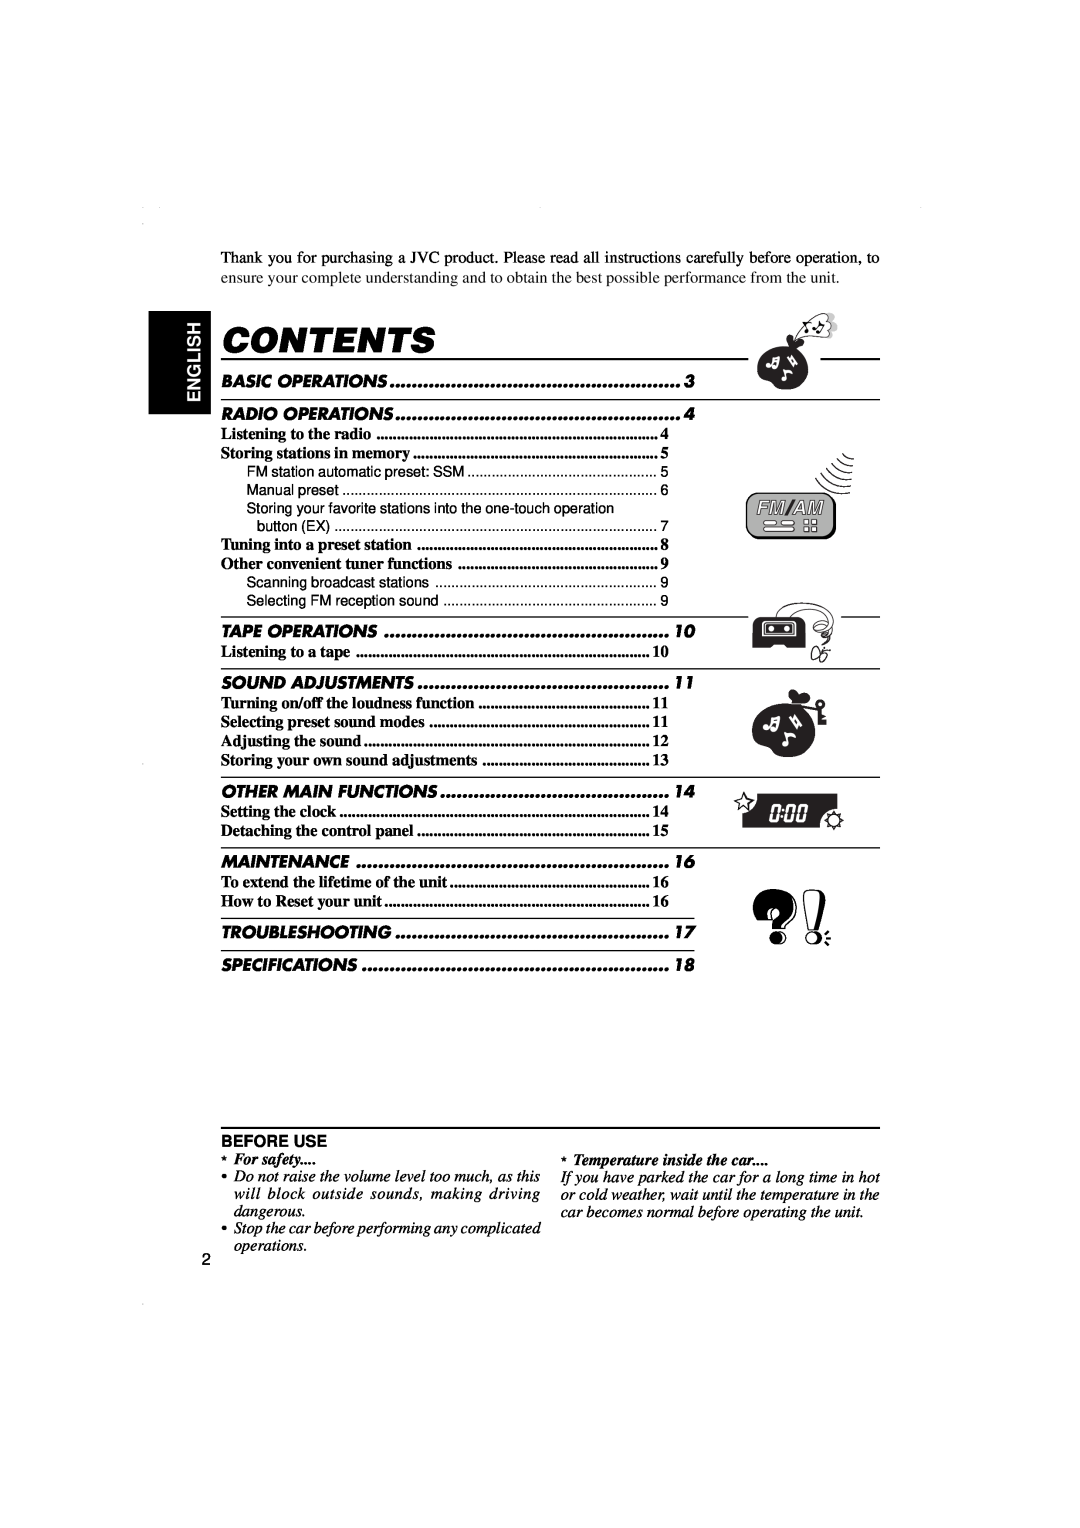 JVC KS-F315EE manual Contents, English, Listening to a tape, Before Use, For safety, Temperature inside the car 